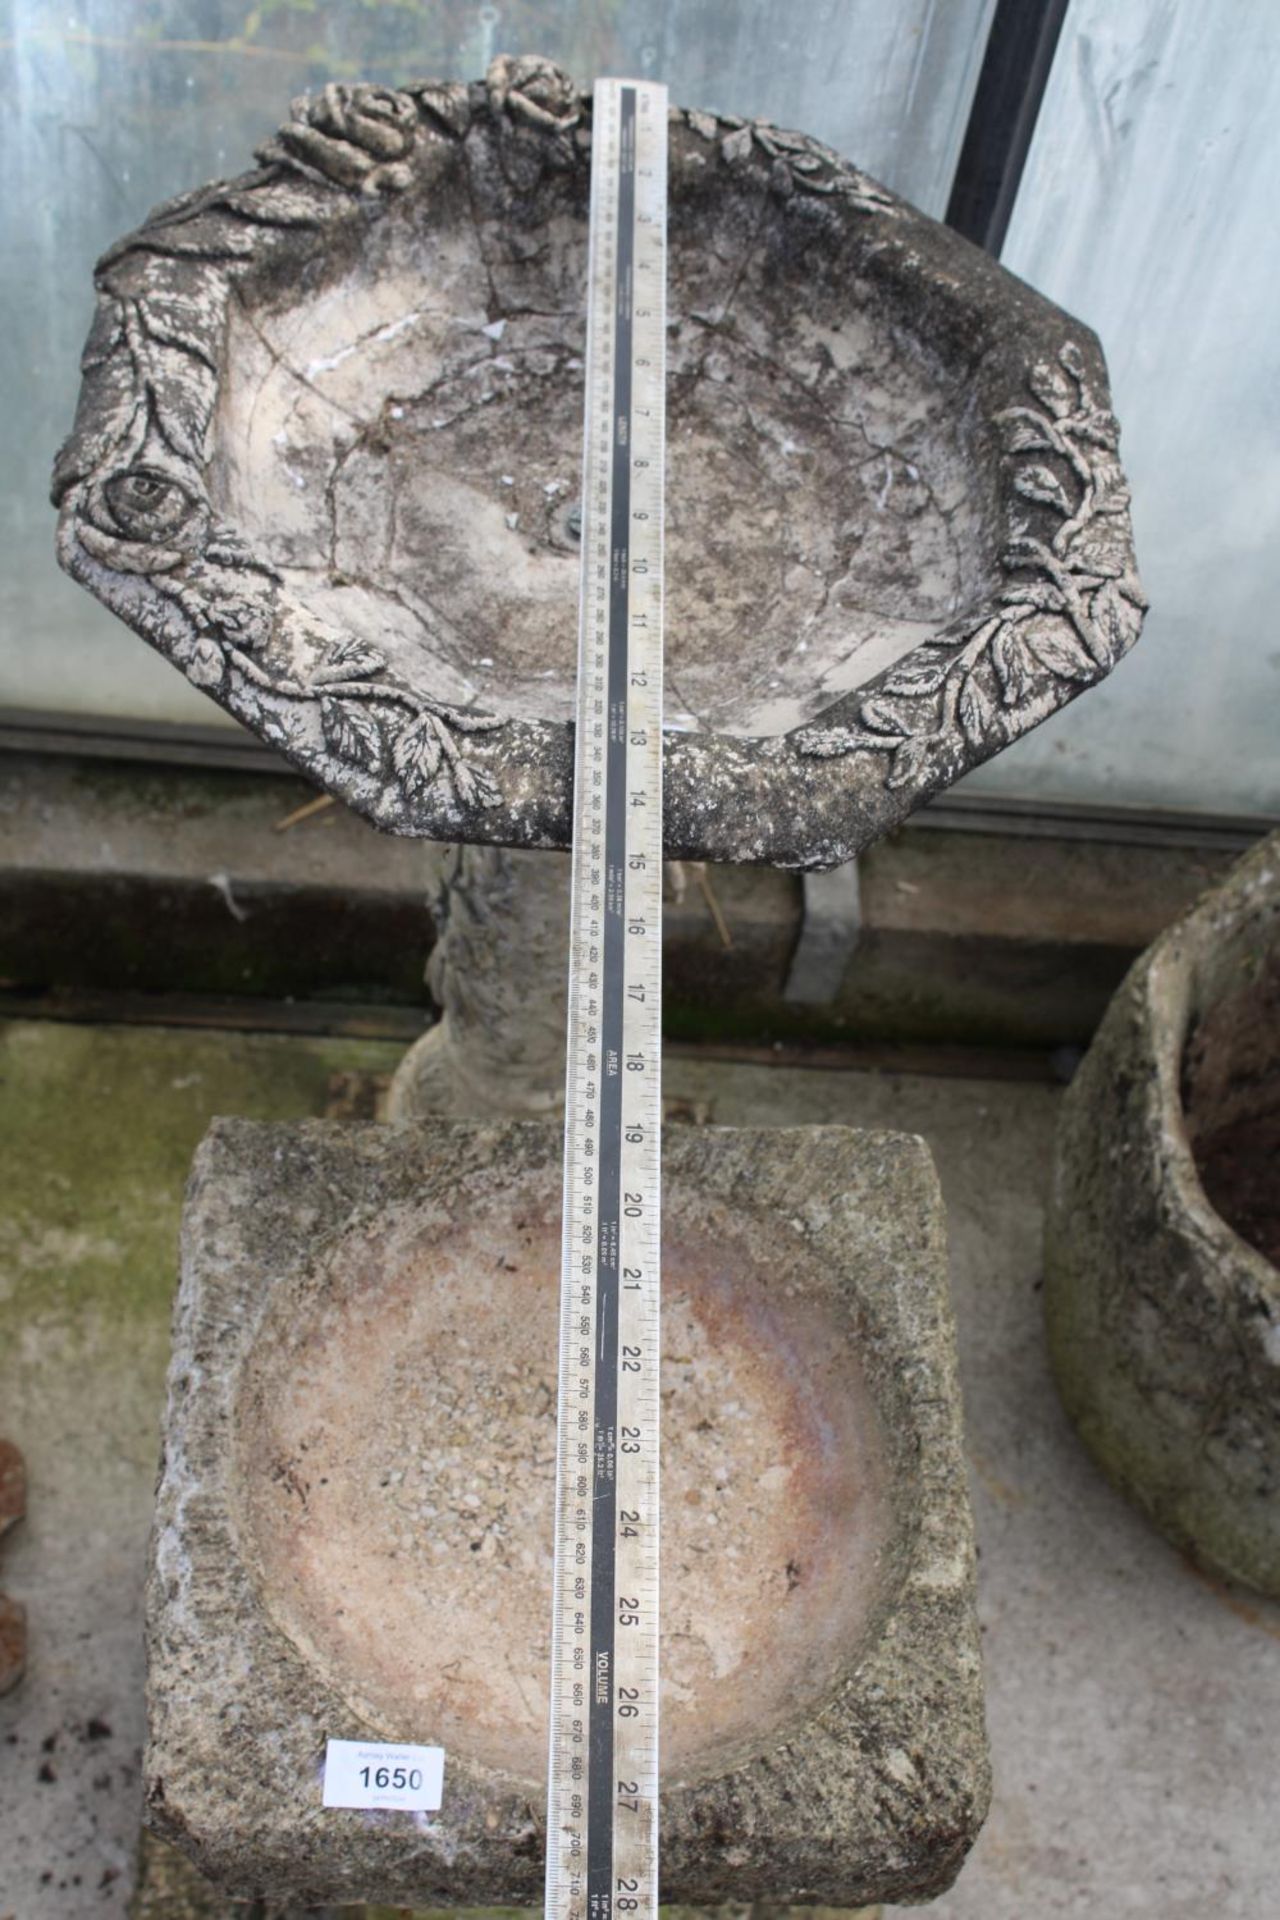 TWO RECONSTITUTED STONE BIRDBATHS WITH PEDESTAL BASES - Image 4 of 4